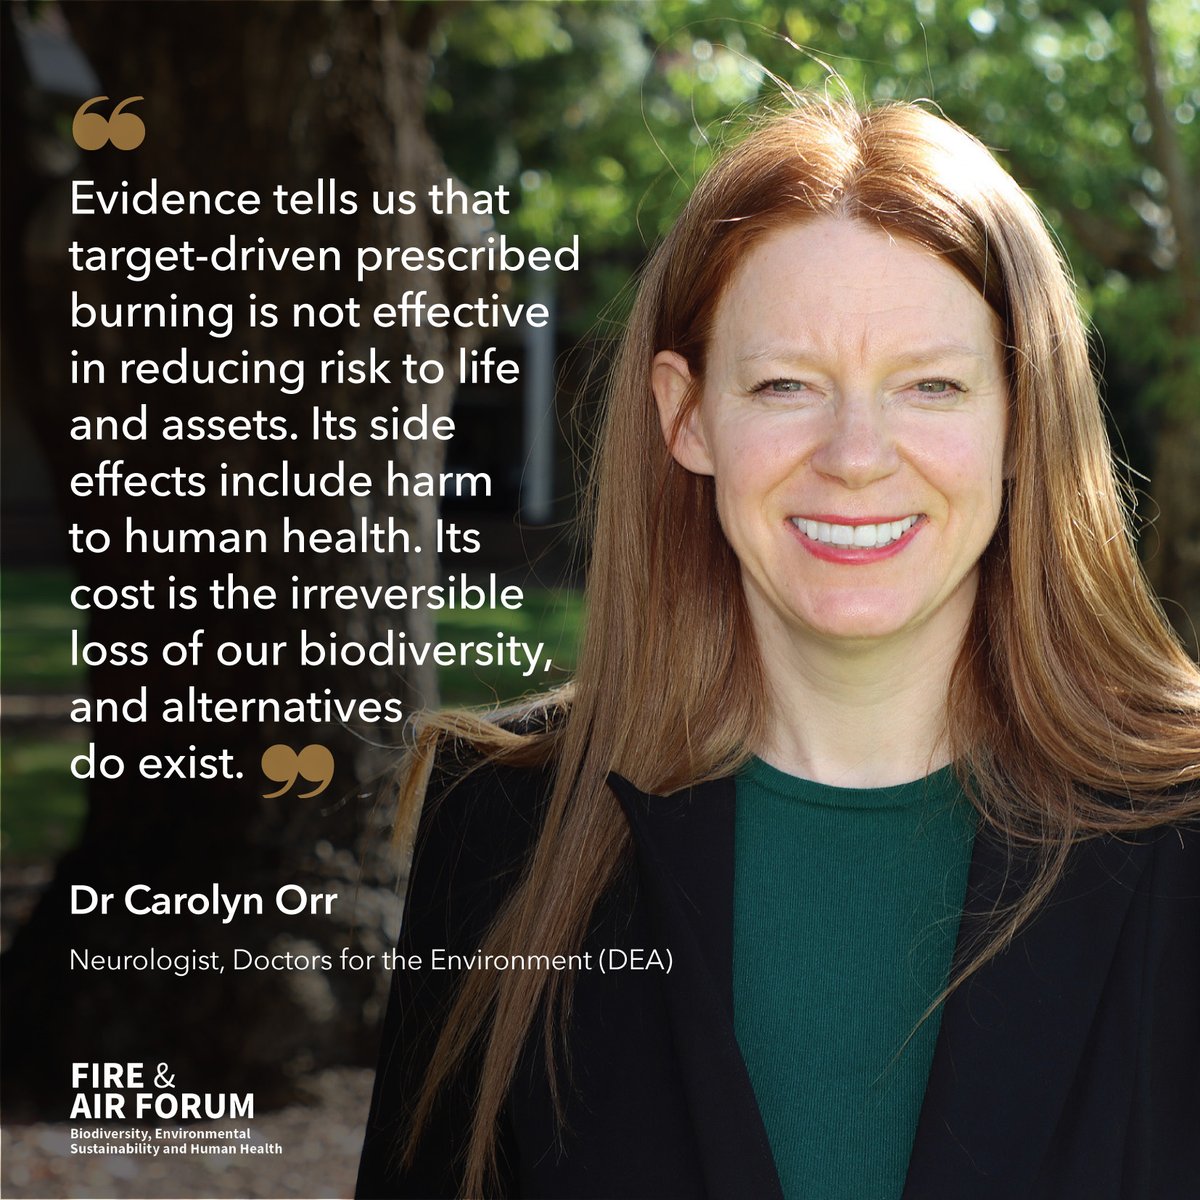 In May this year @DrCarolynOrr spoke at the Fire and Air Forum, giving us a detailed analysis of WA’s prescribed burning regime from the perspective of a medical practitioner. View her full speech here: vimeo.com/852063340 #biodiversity #health 💚💚💚